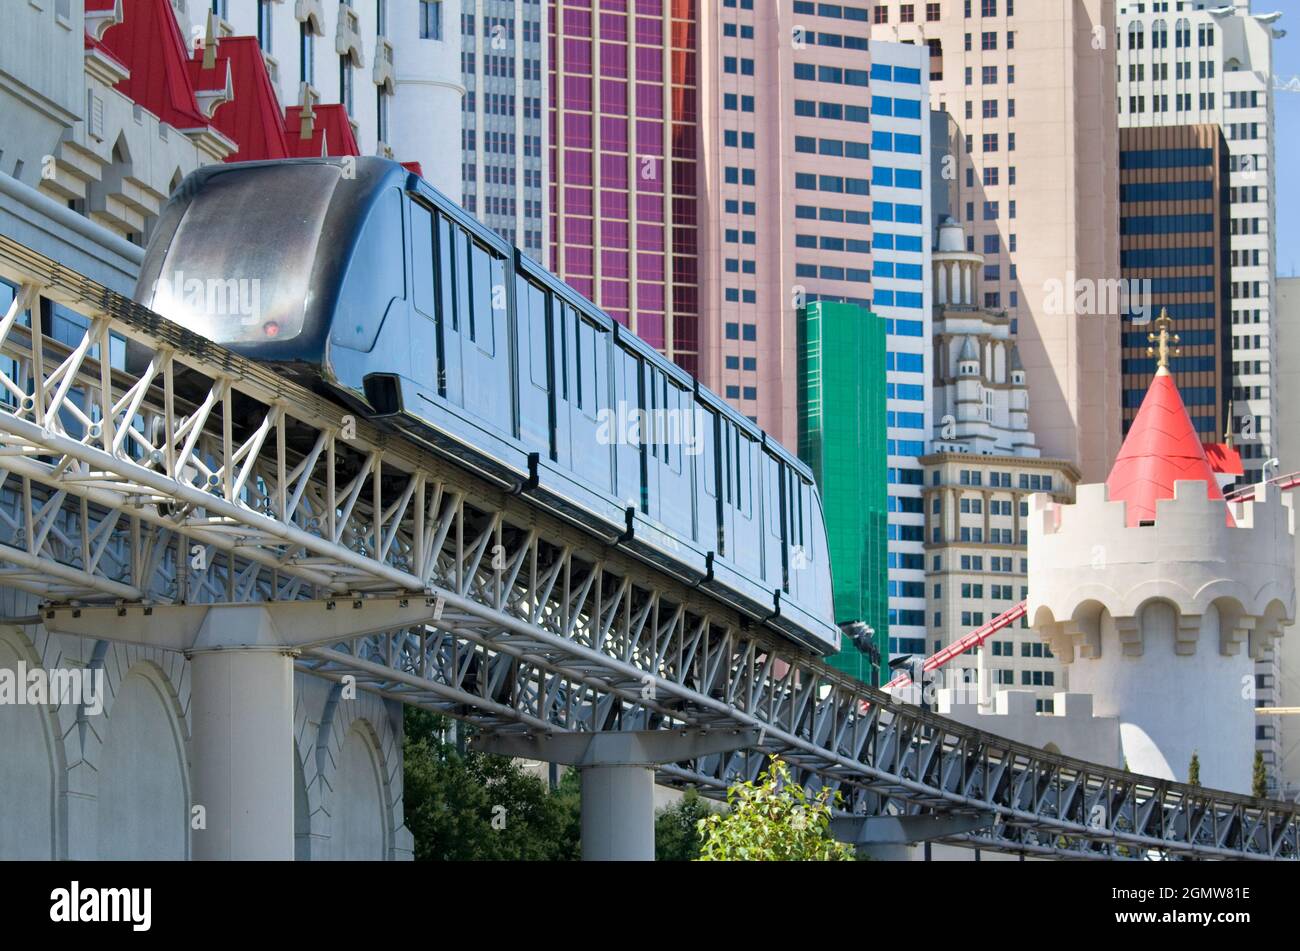 Las Vegas, Arizona - June 2008. It's not just Springfield that has a monorail - Las Vegas has one of its very own, probably built by the same company. Stock Photo